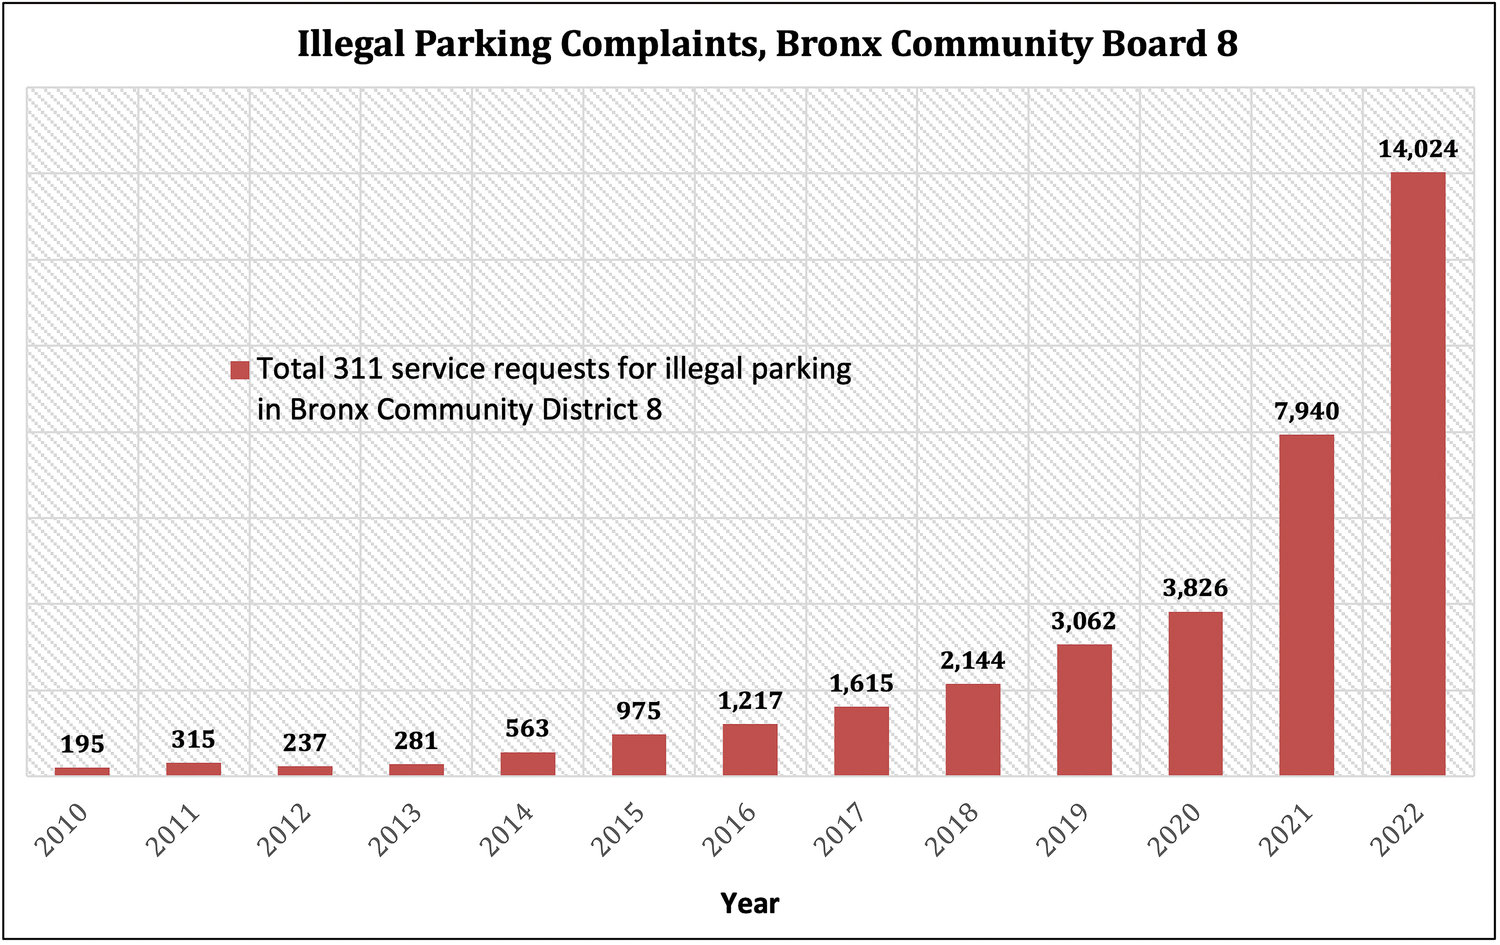 New York City 311 service request data shows a dramatic increase in illegal parking complaints in Bronx Community Board 8, where more than half of all 311 requests for non-emergency police matters in 2022 were for illegal parking, compared to only 6 percent in 2010.